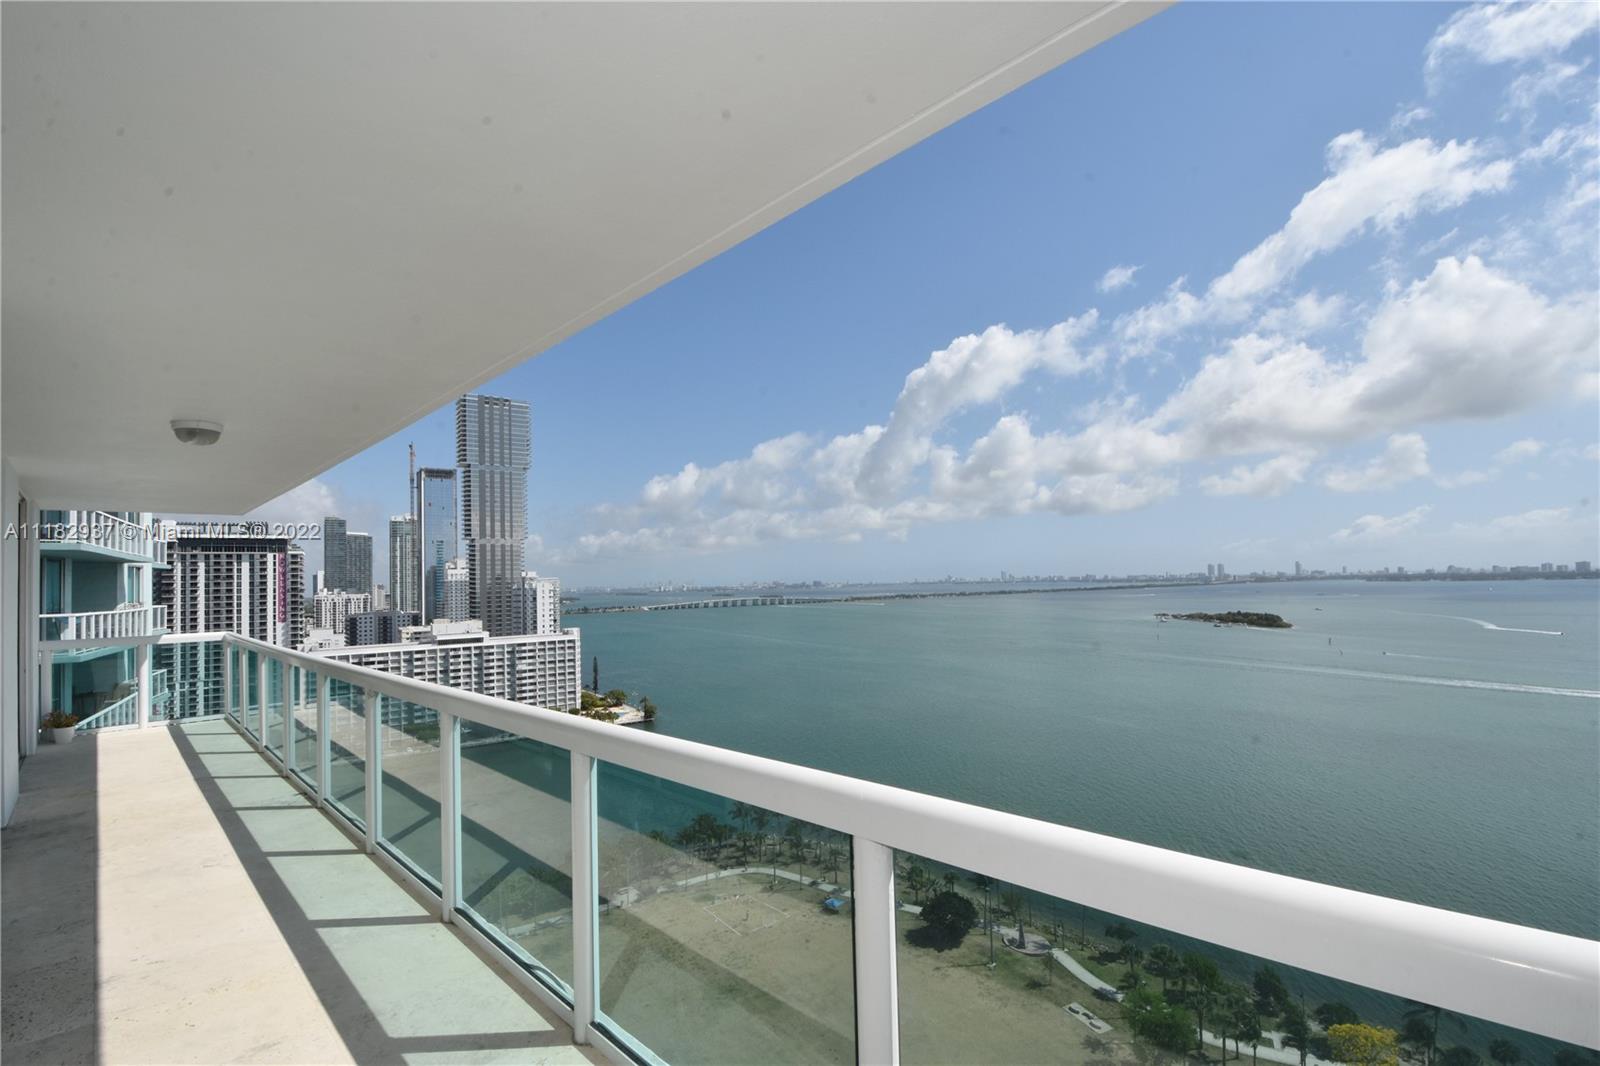 LOCATION!!!LOCATION!!!LOCATION!! RARE 09 line on the market of the amazing 1800 Club Condo building in sought after Edgewater. 2 bedroom 2 bath . Breathtaking bay views directly across Biscayne Bay & Margaret Pace Park within walking distance from the Performance Arts Center, and minutes from the best areas in Miami: Downtown, Wynwood, Brickell, Midtown, Design District ,Miami Beach, Port of Miami and the Miami Intl airport. Walk to cafes, restaurants, night life and so much more. Fitness center , spa, 3 pools, sky lobby and party room.